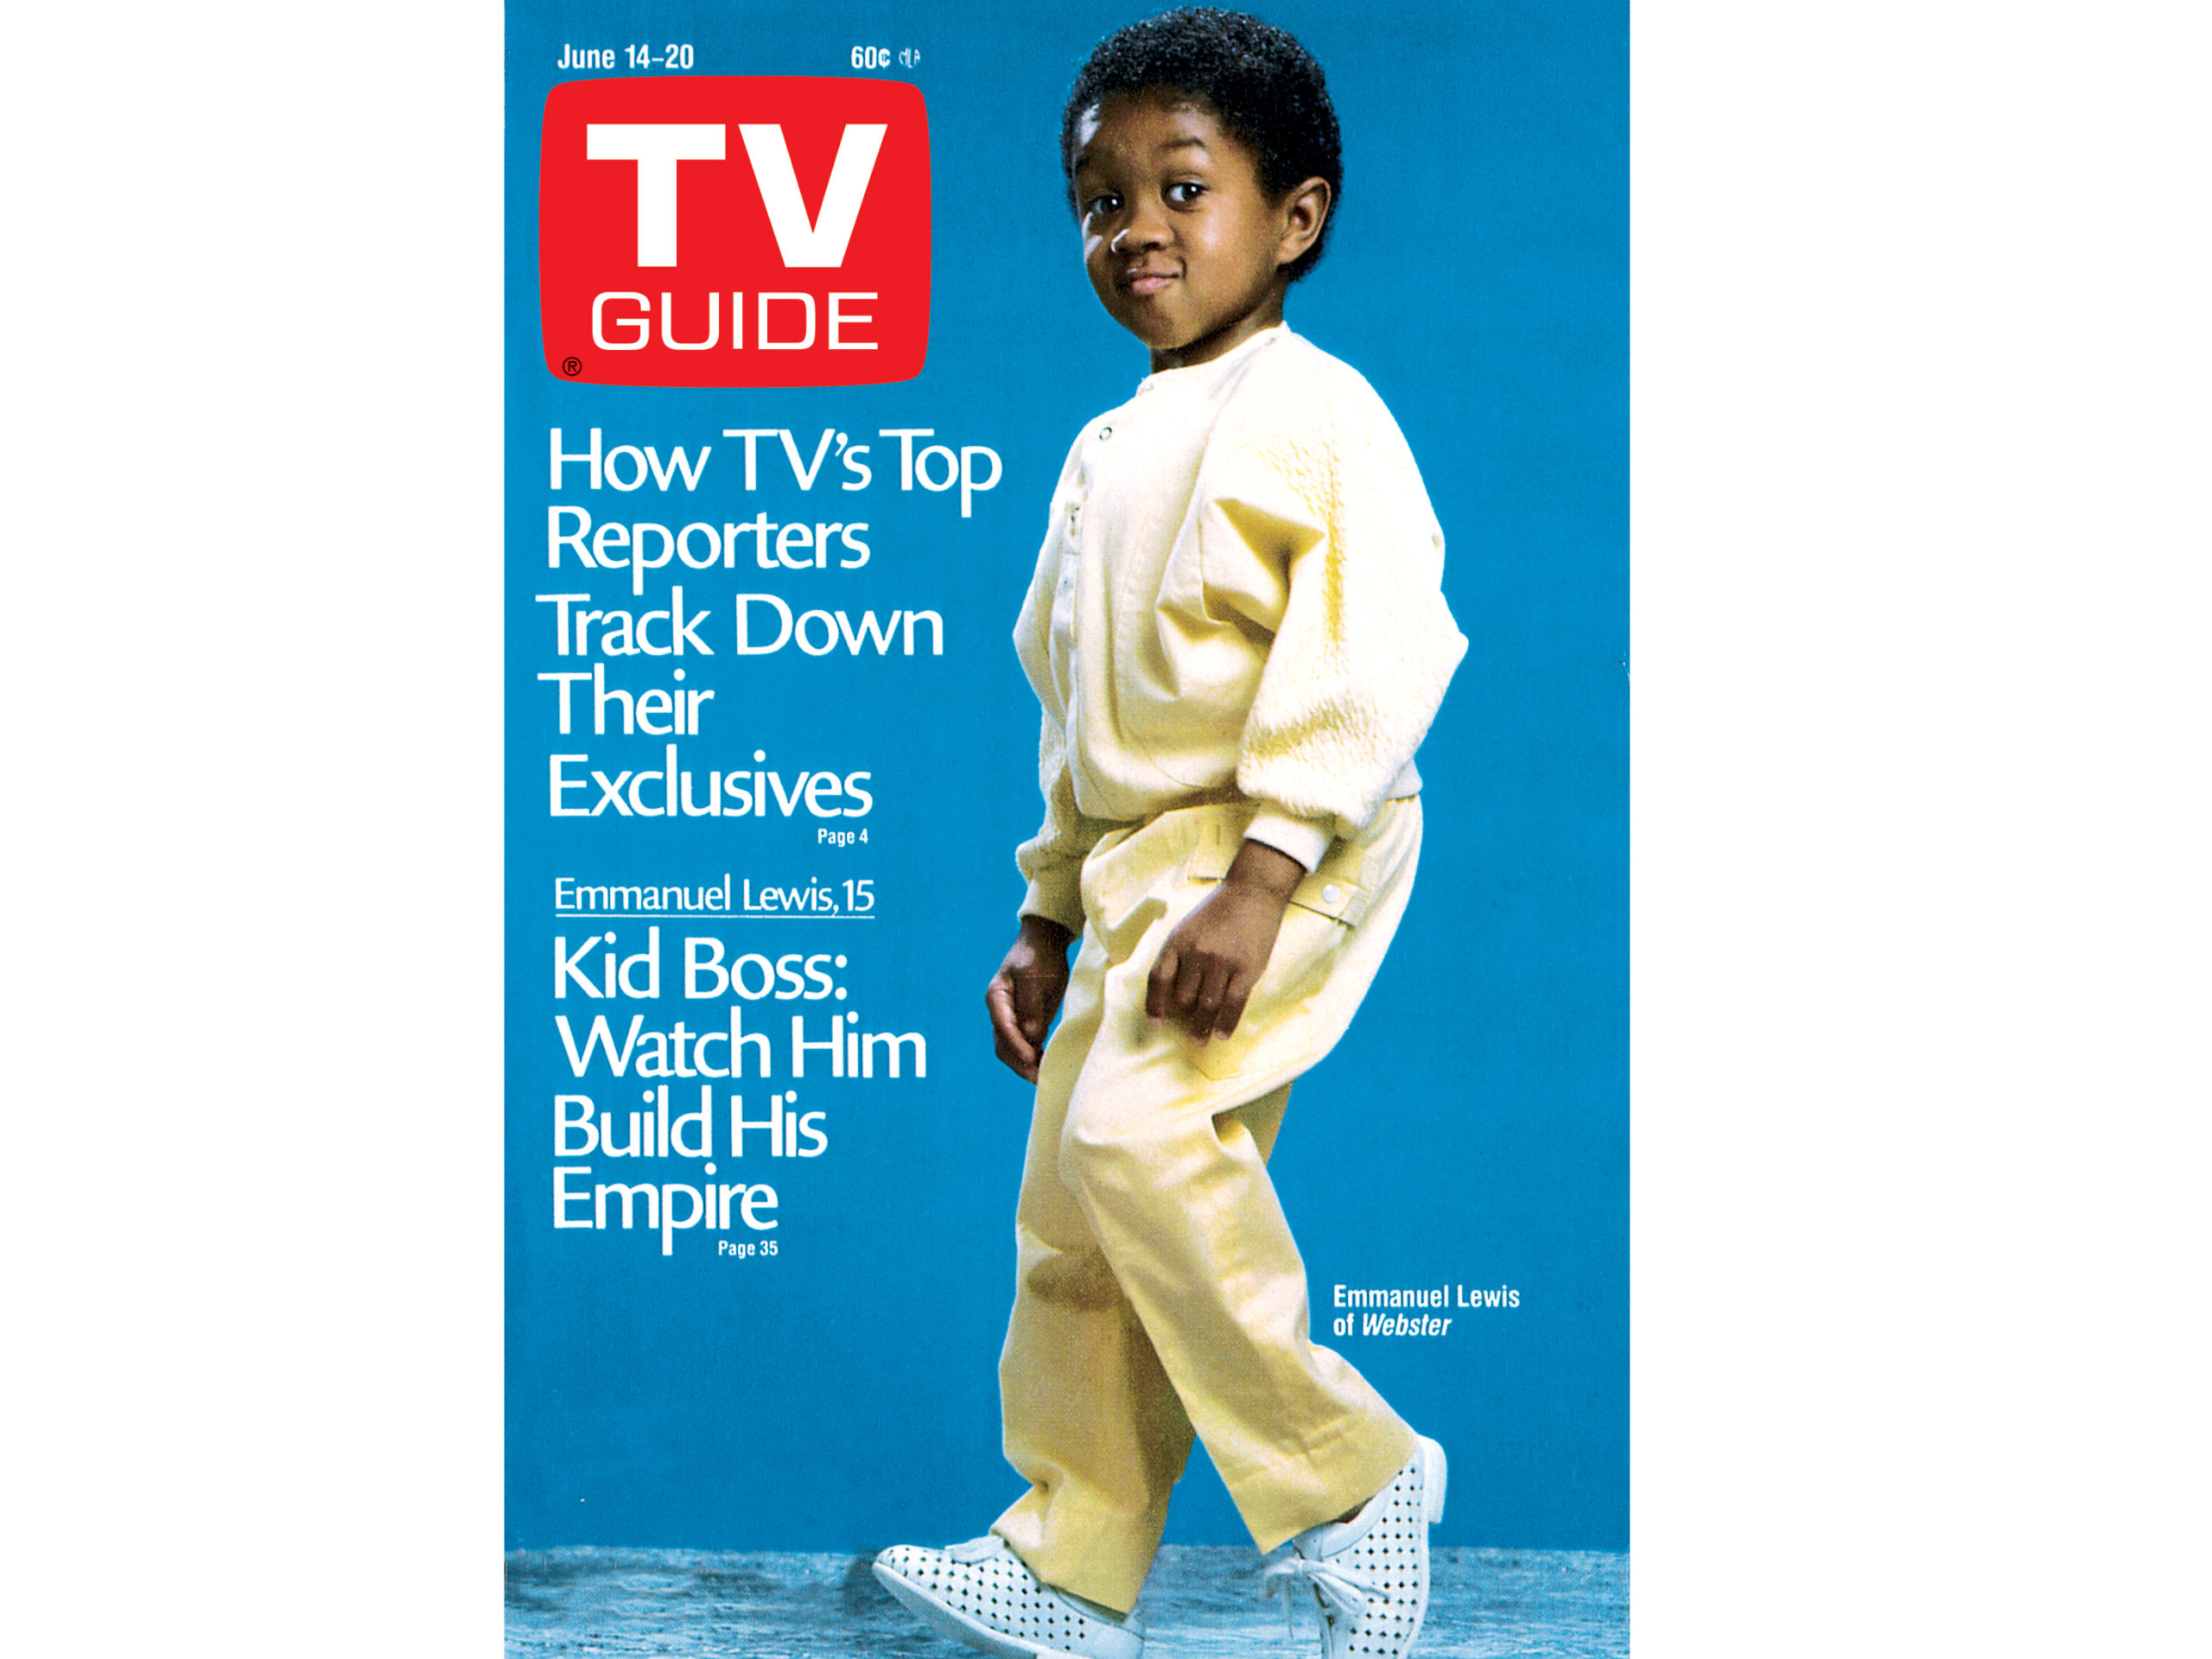 20 Classic TV Guide Magazine Covers From the 1980s (PHOTOS)